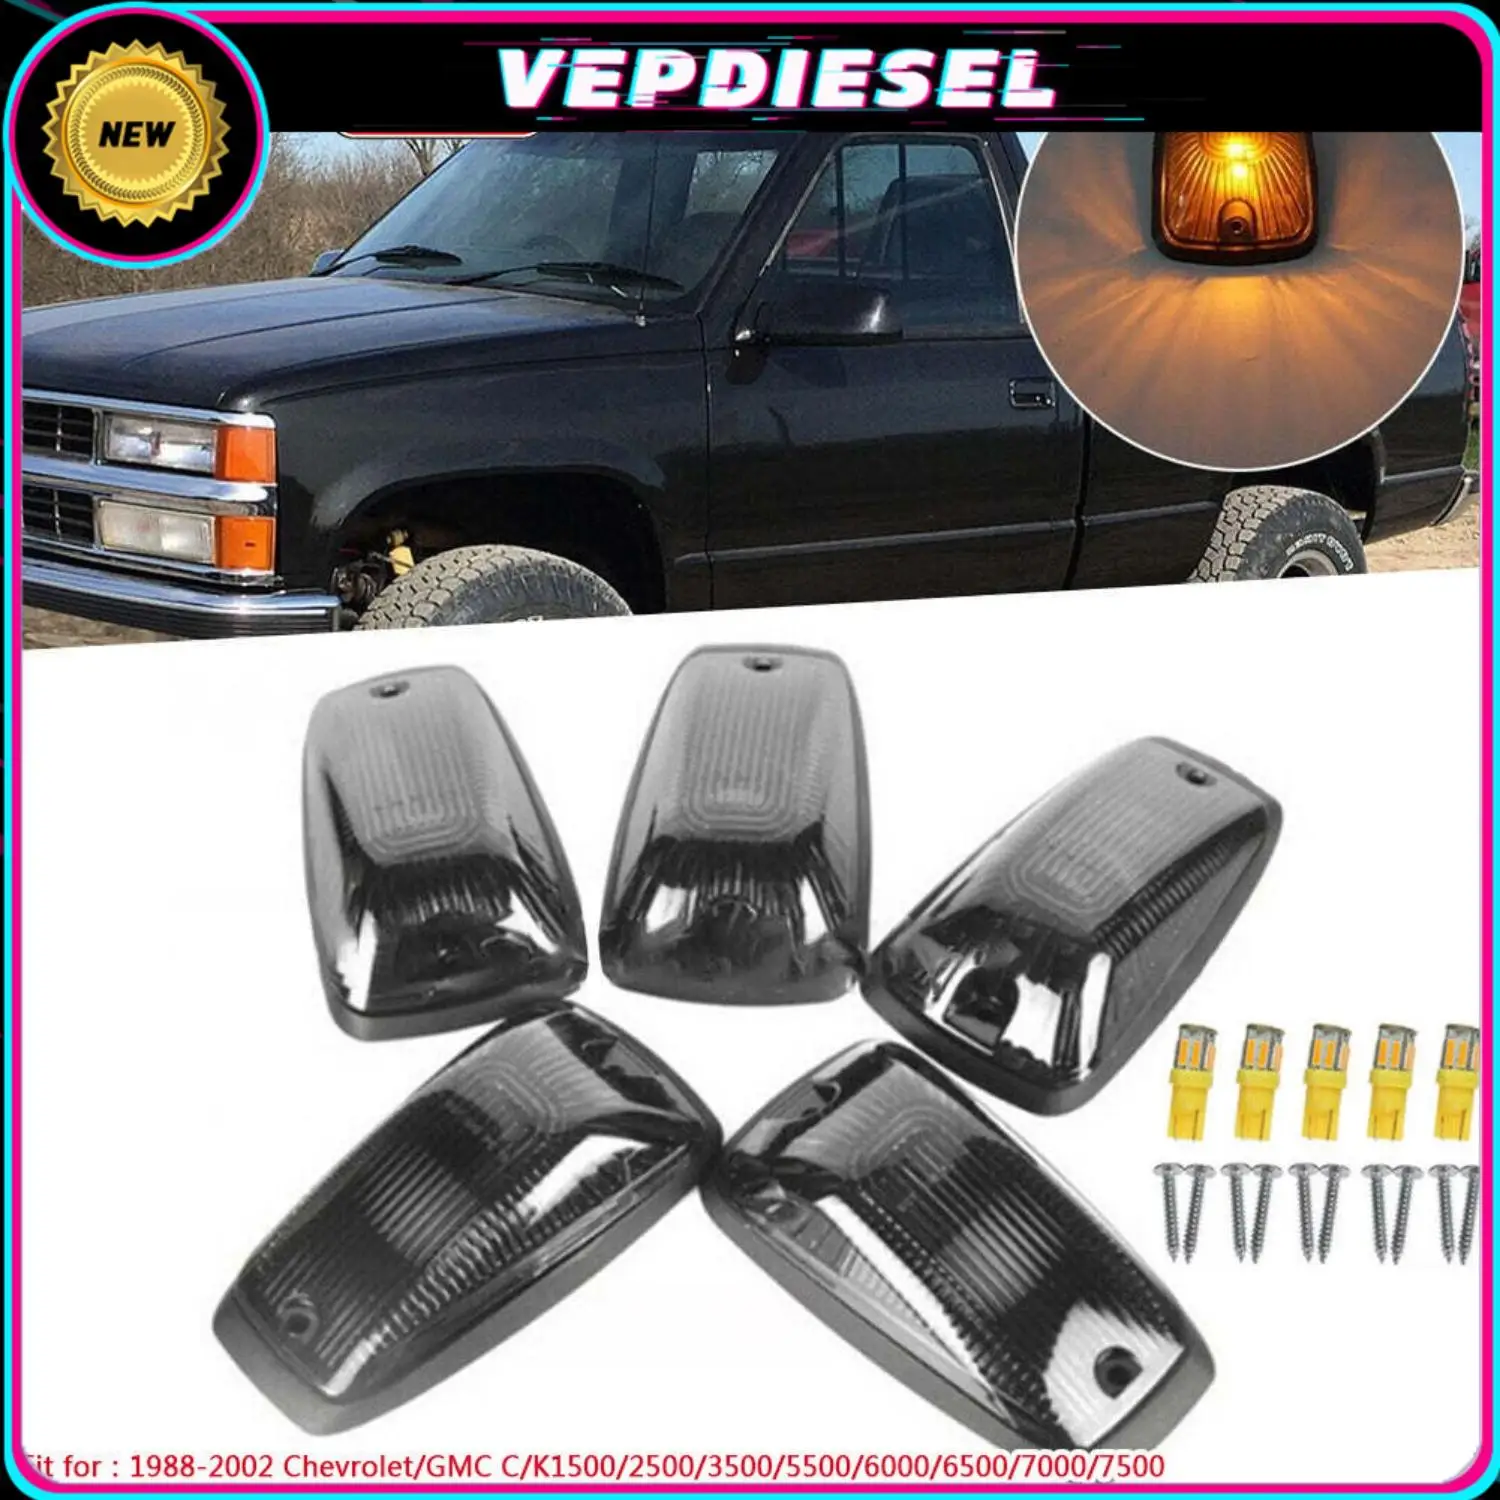 

5pcs New Amber LED Cab Marker Roof Lights For 1988-2002 Chevy GMC C/K 1500 2500 3500 Pickup Trucks Dome Lights